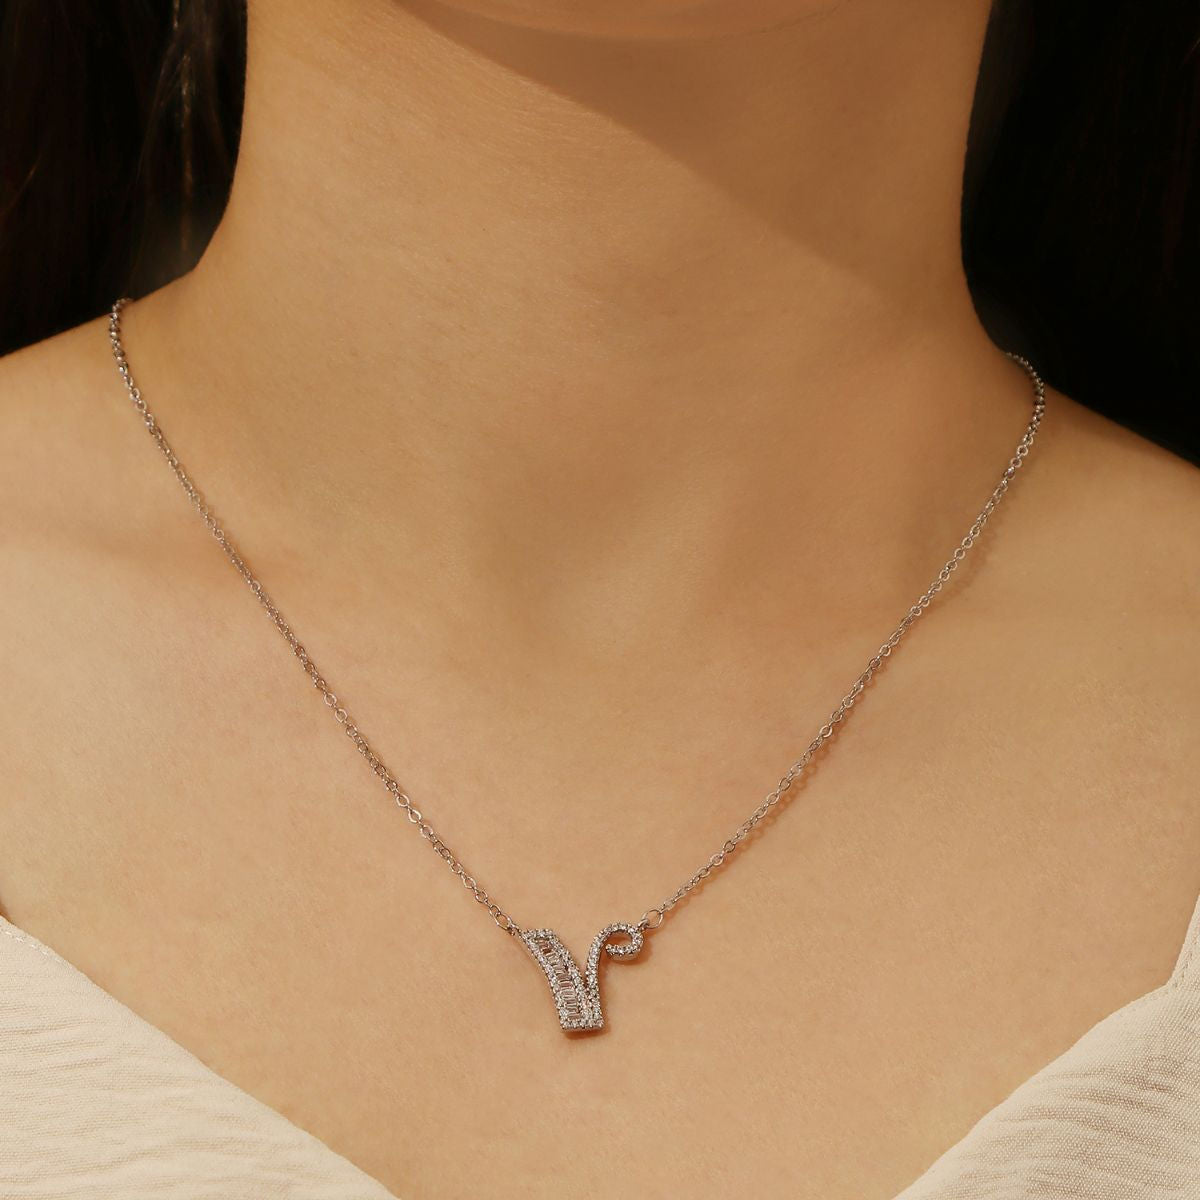 Silver Stone Initial Pendant Necklace - V